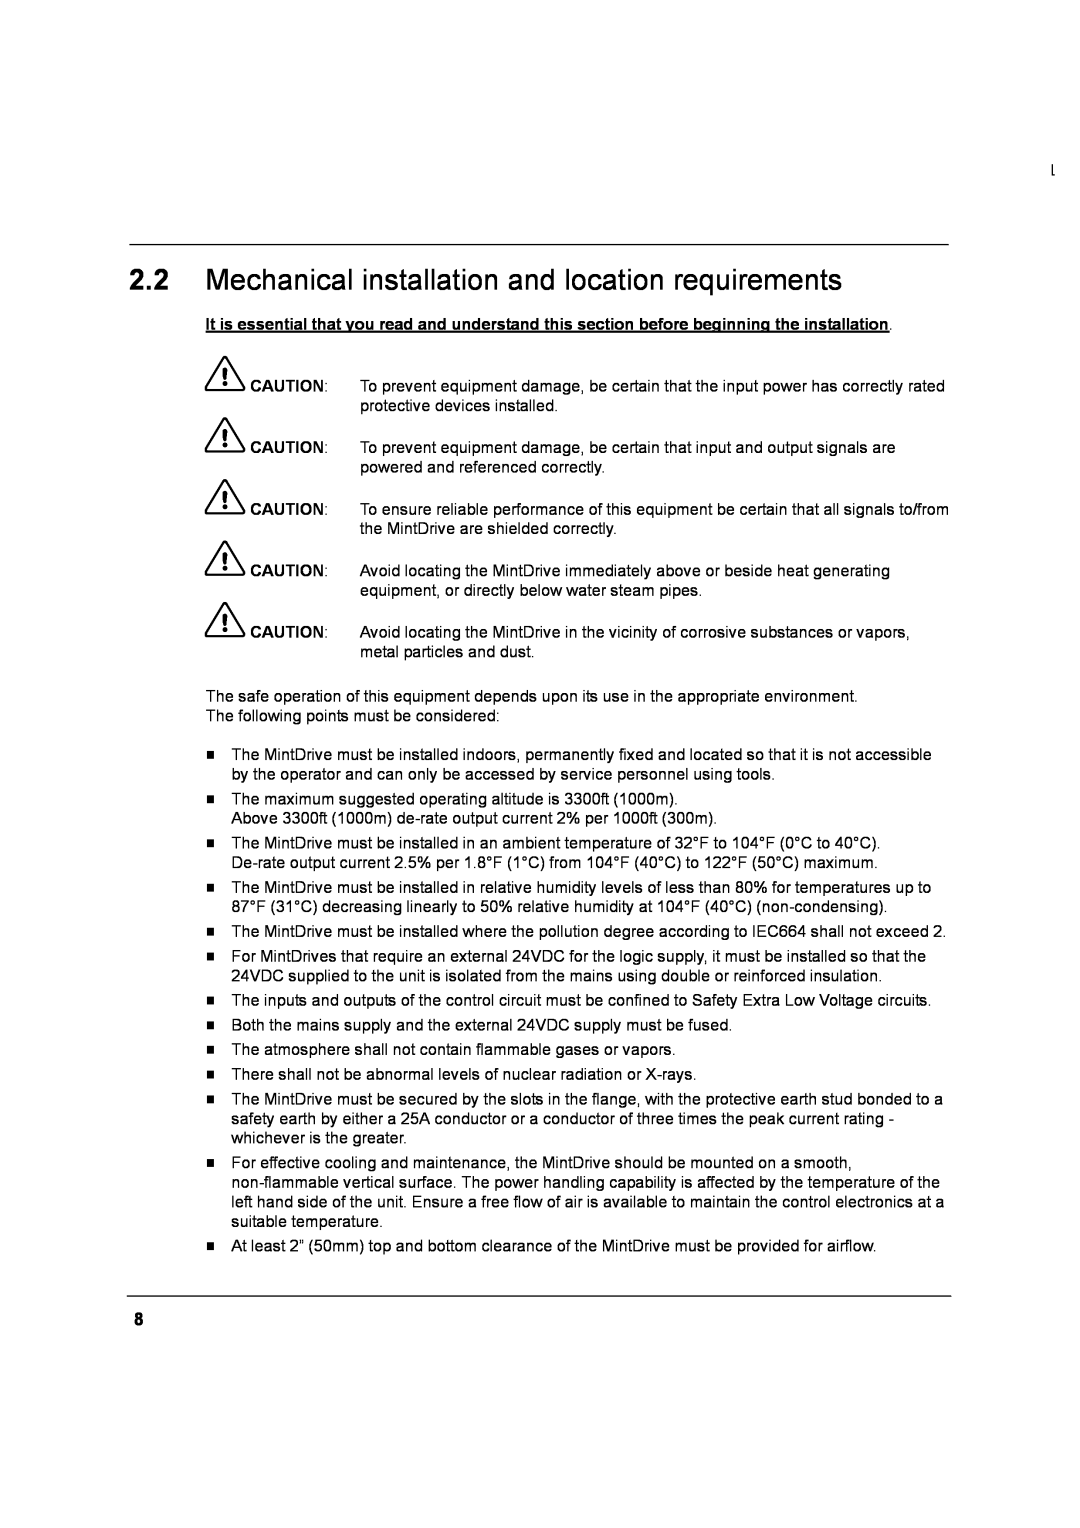 Baldor MN1274 06/2001 installation manual Mechanical installation and location requirements 